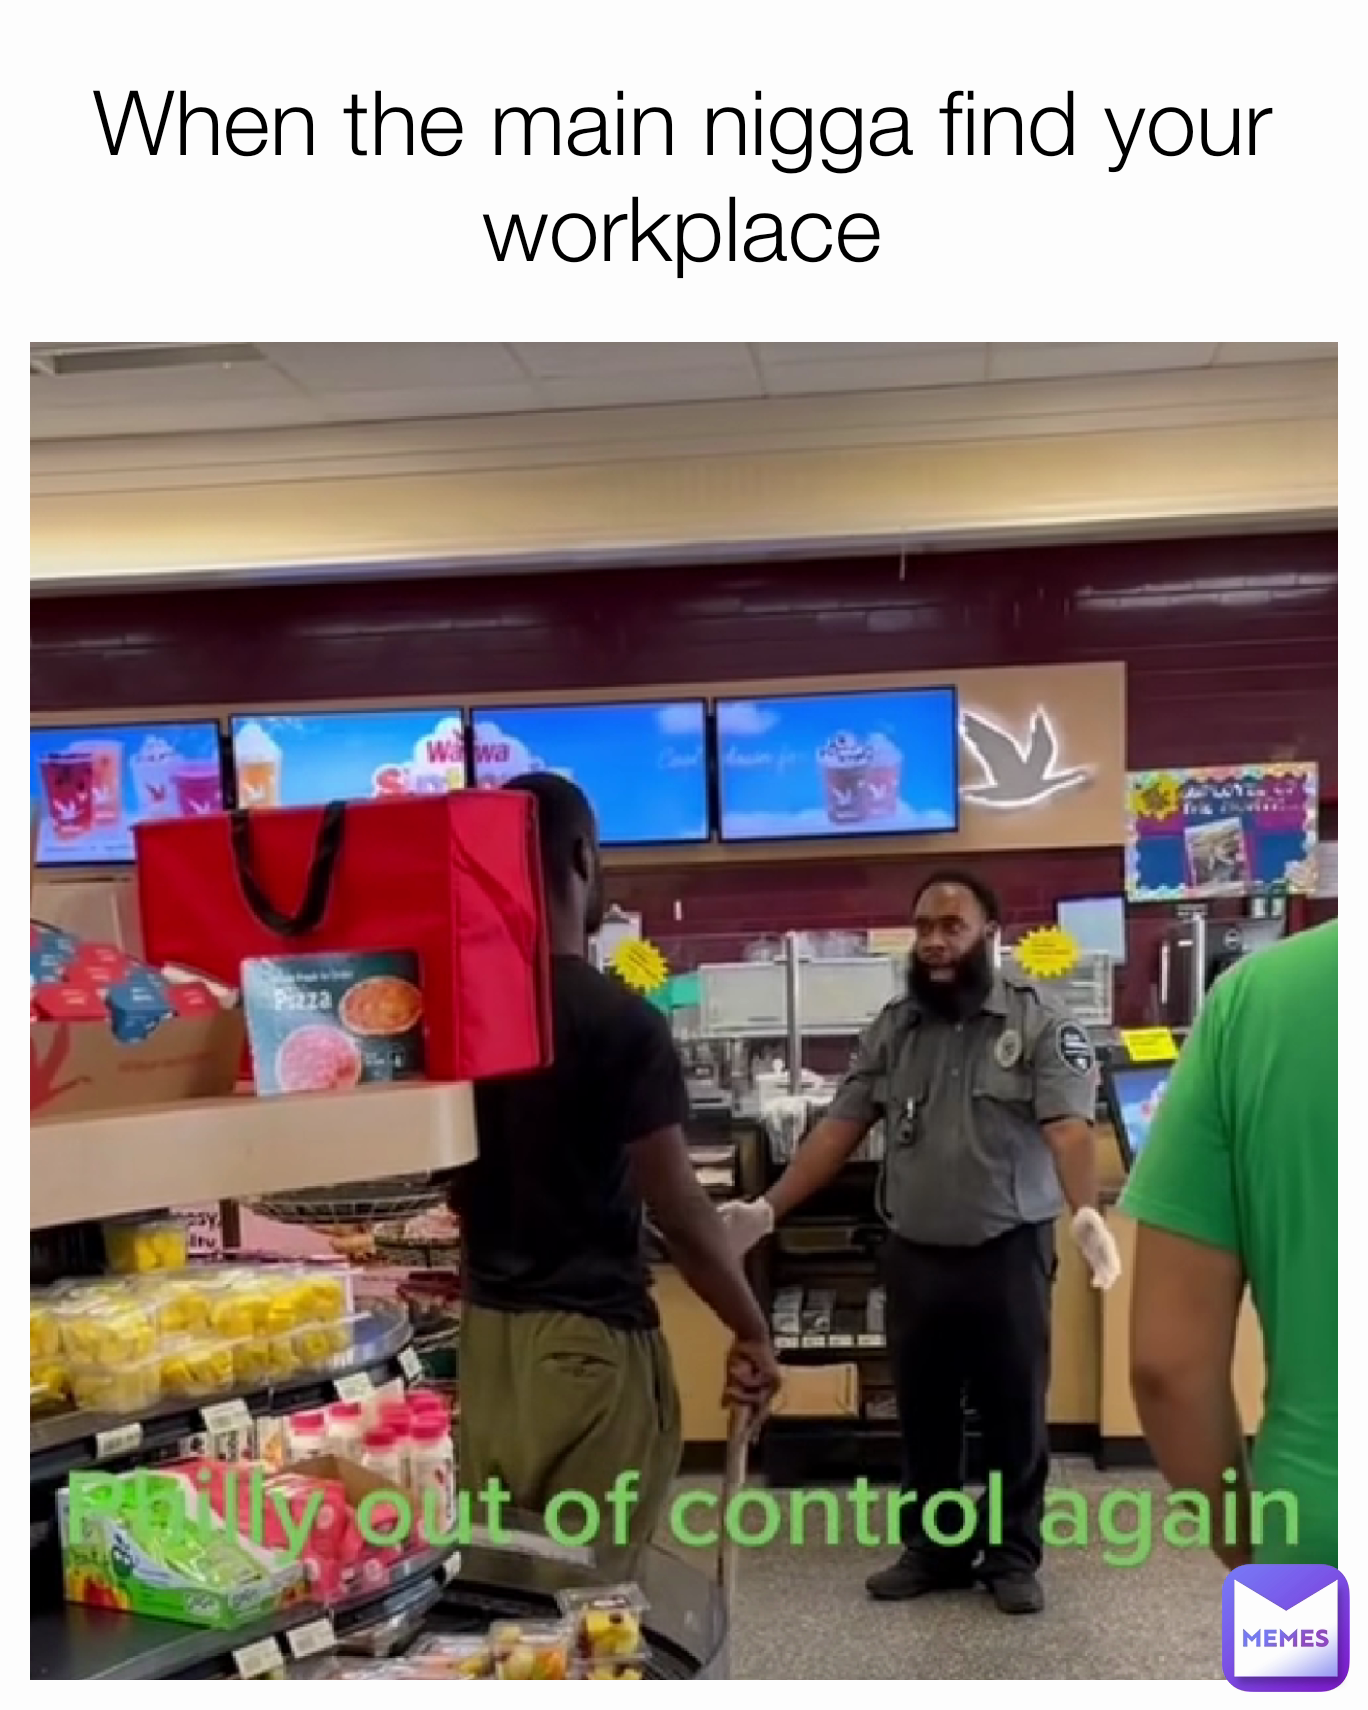 When the main nigga find your workplace